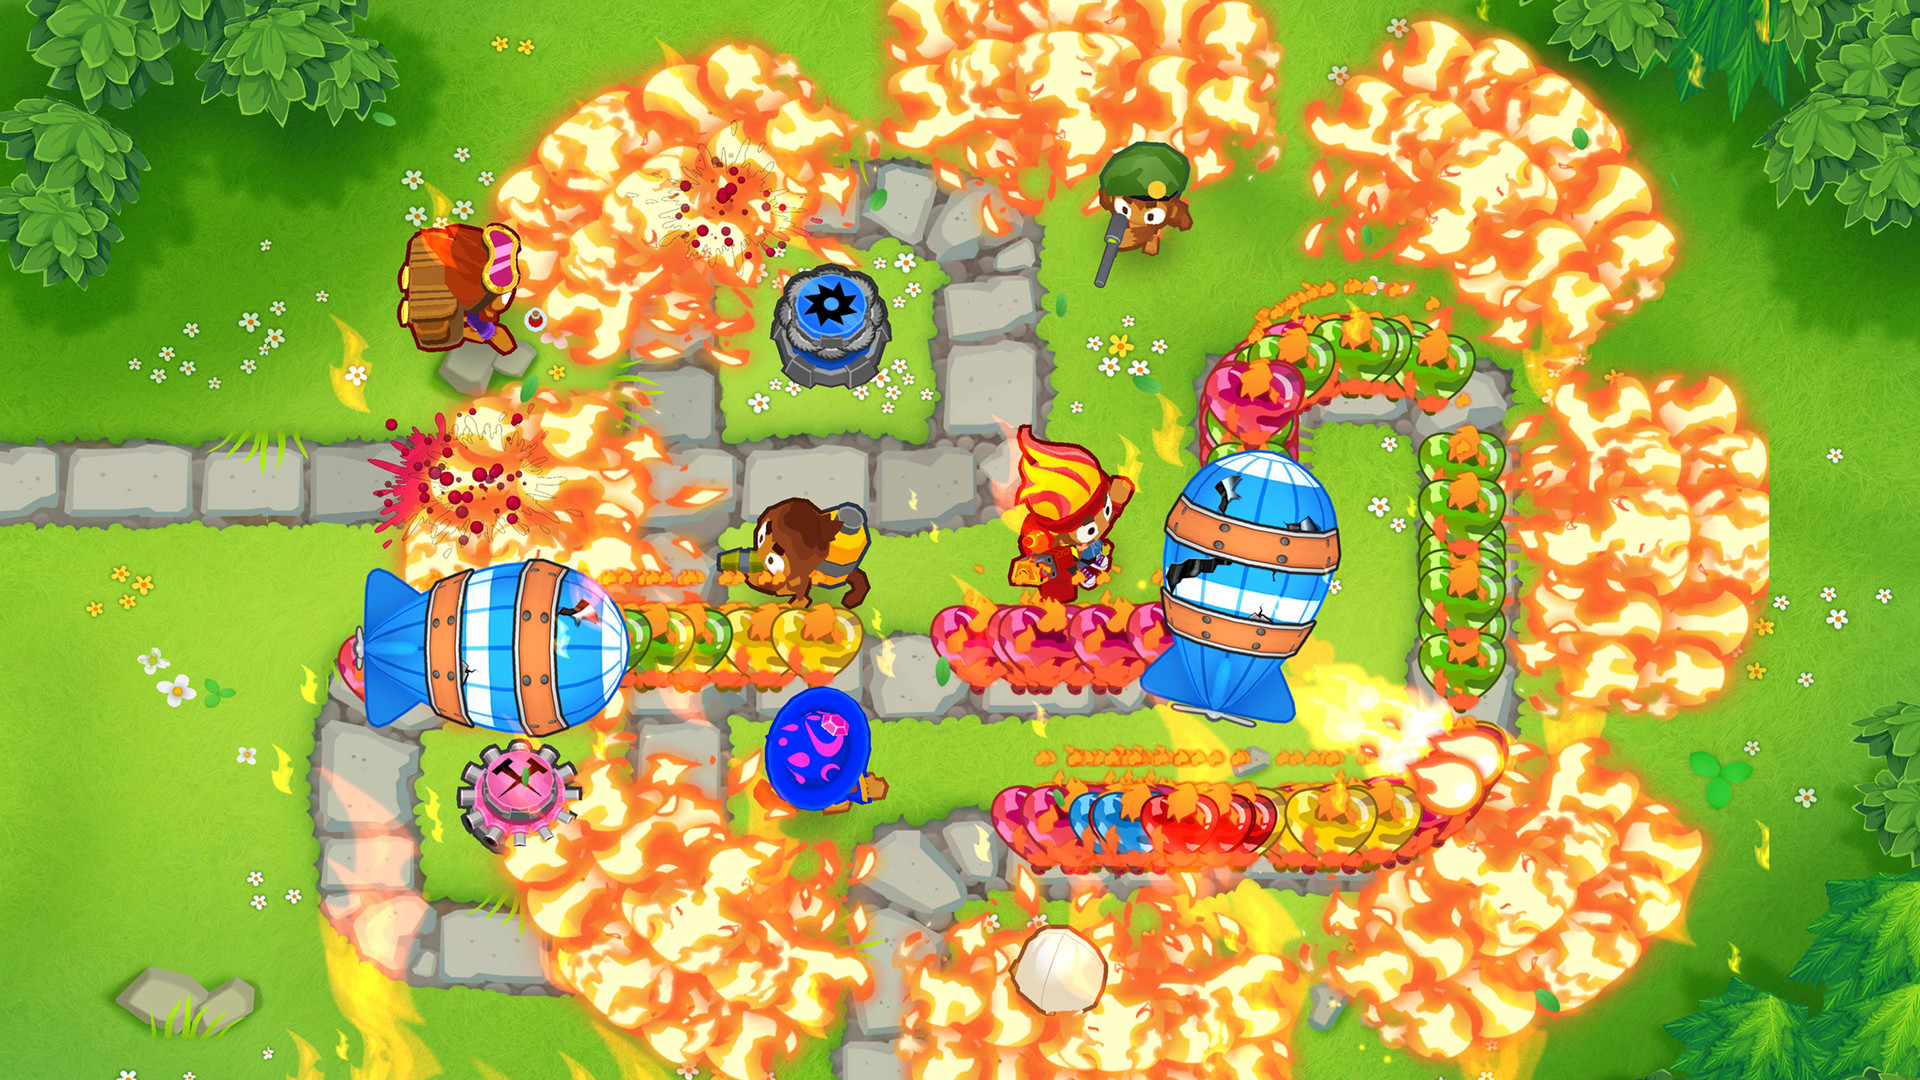 Bloons tower defense 6 hacked